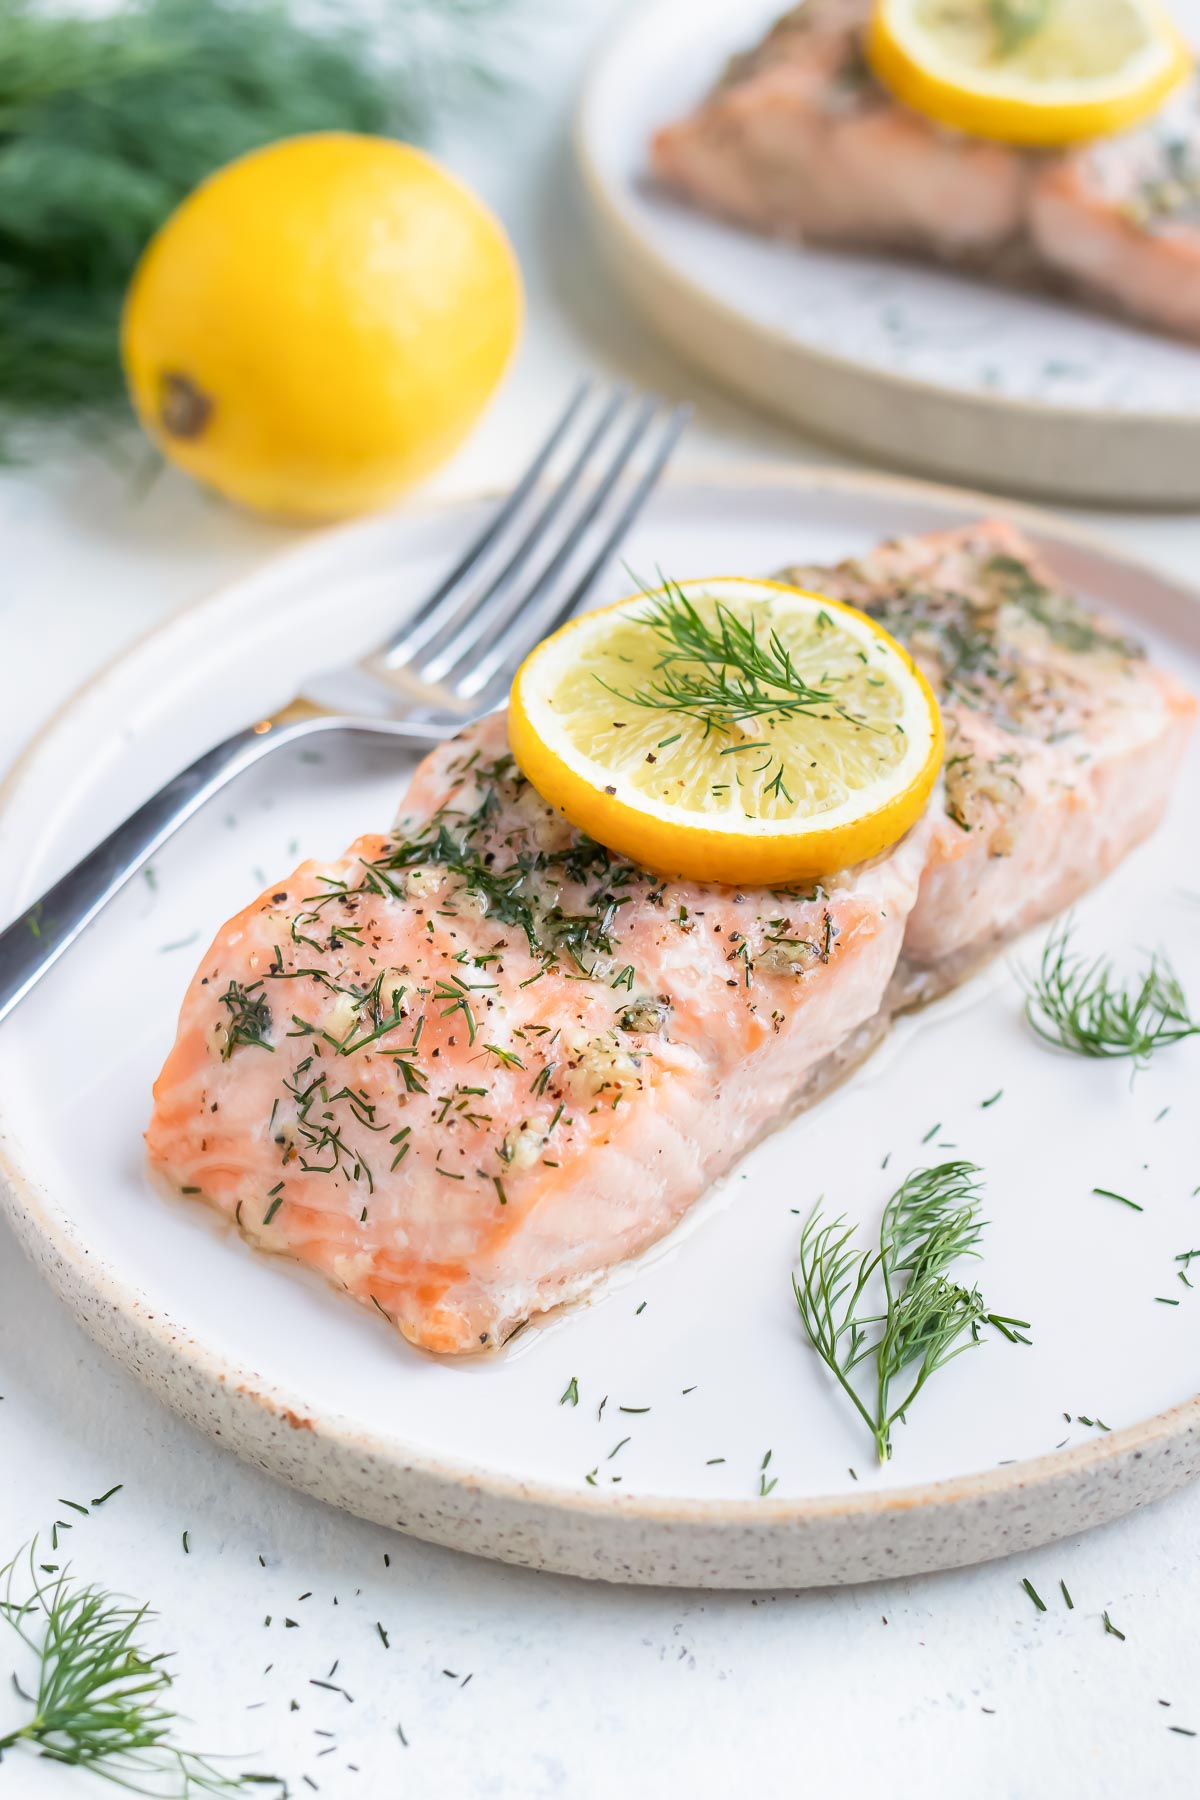 Lemon and dill salmon is served on a white plate with a fork.